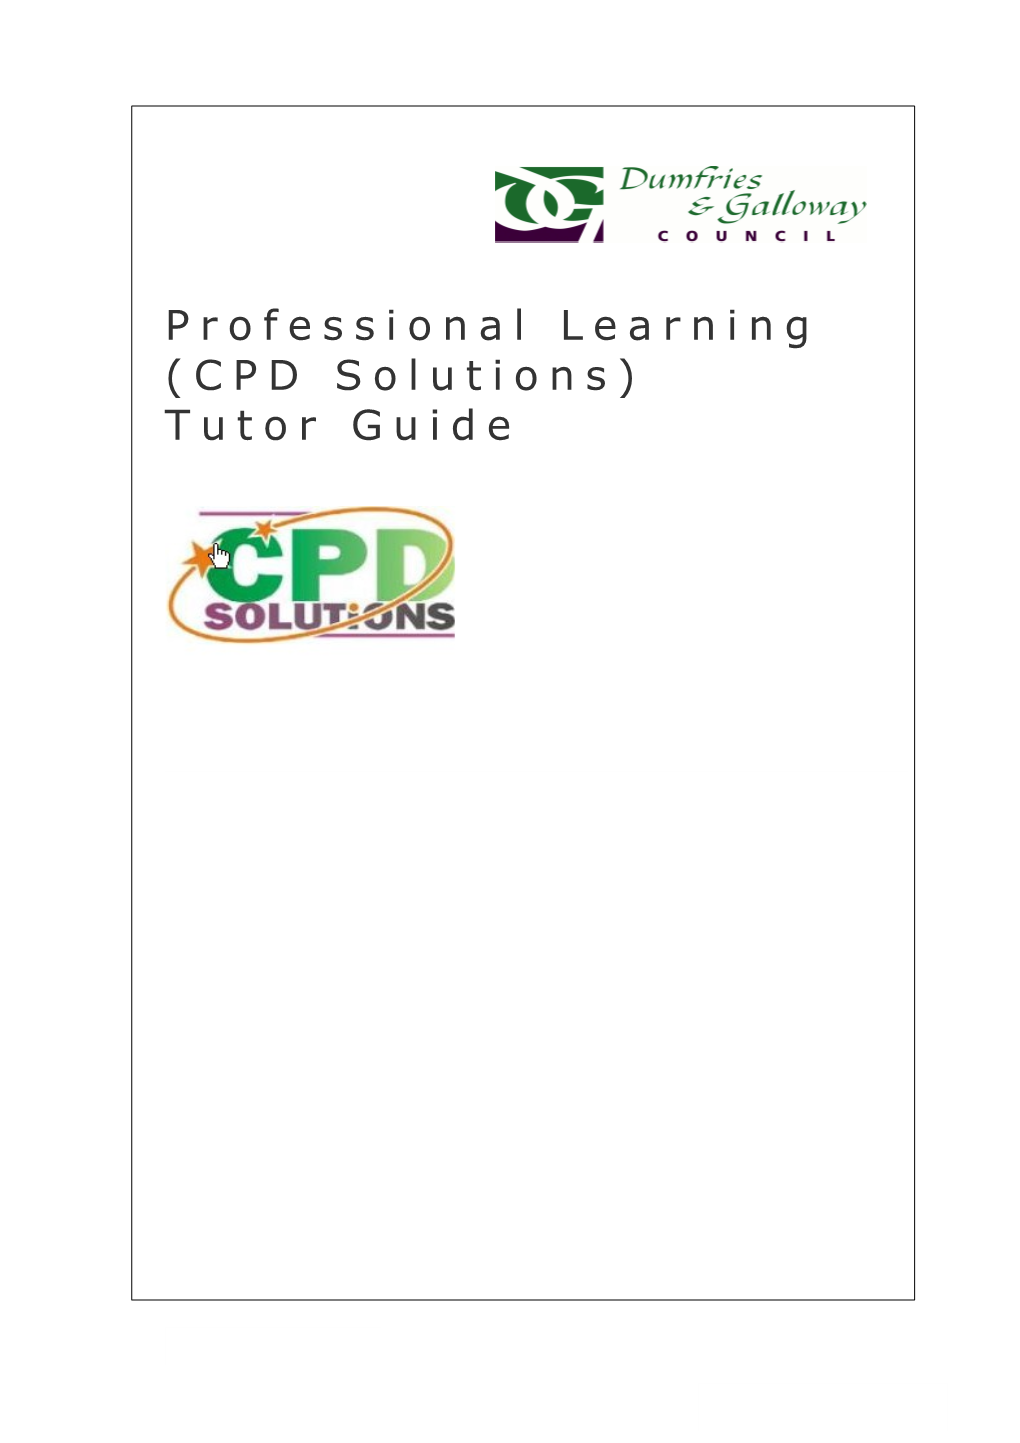 How to Add a Course to the CPD Solutions System